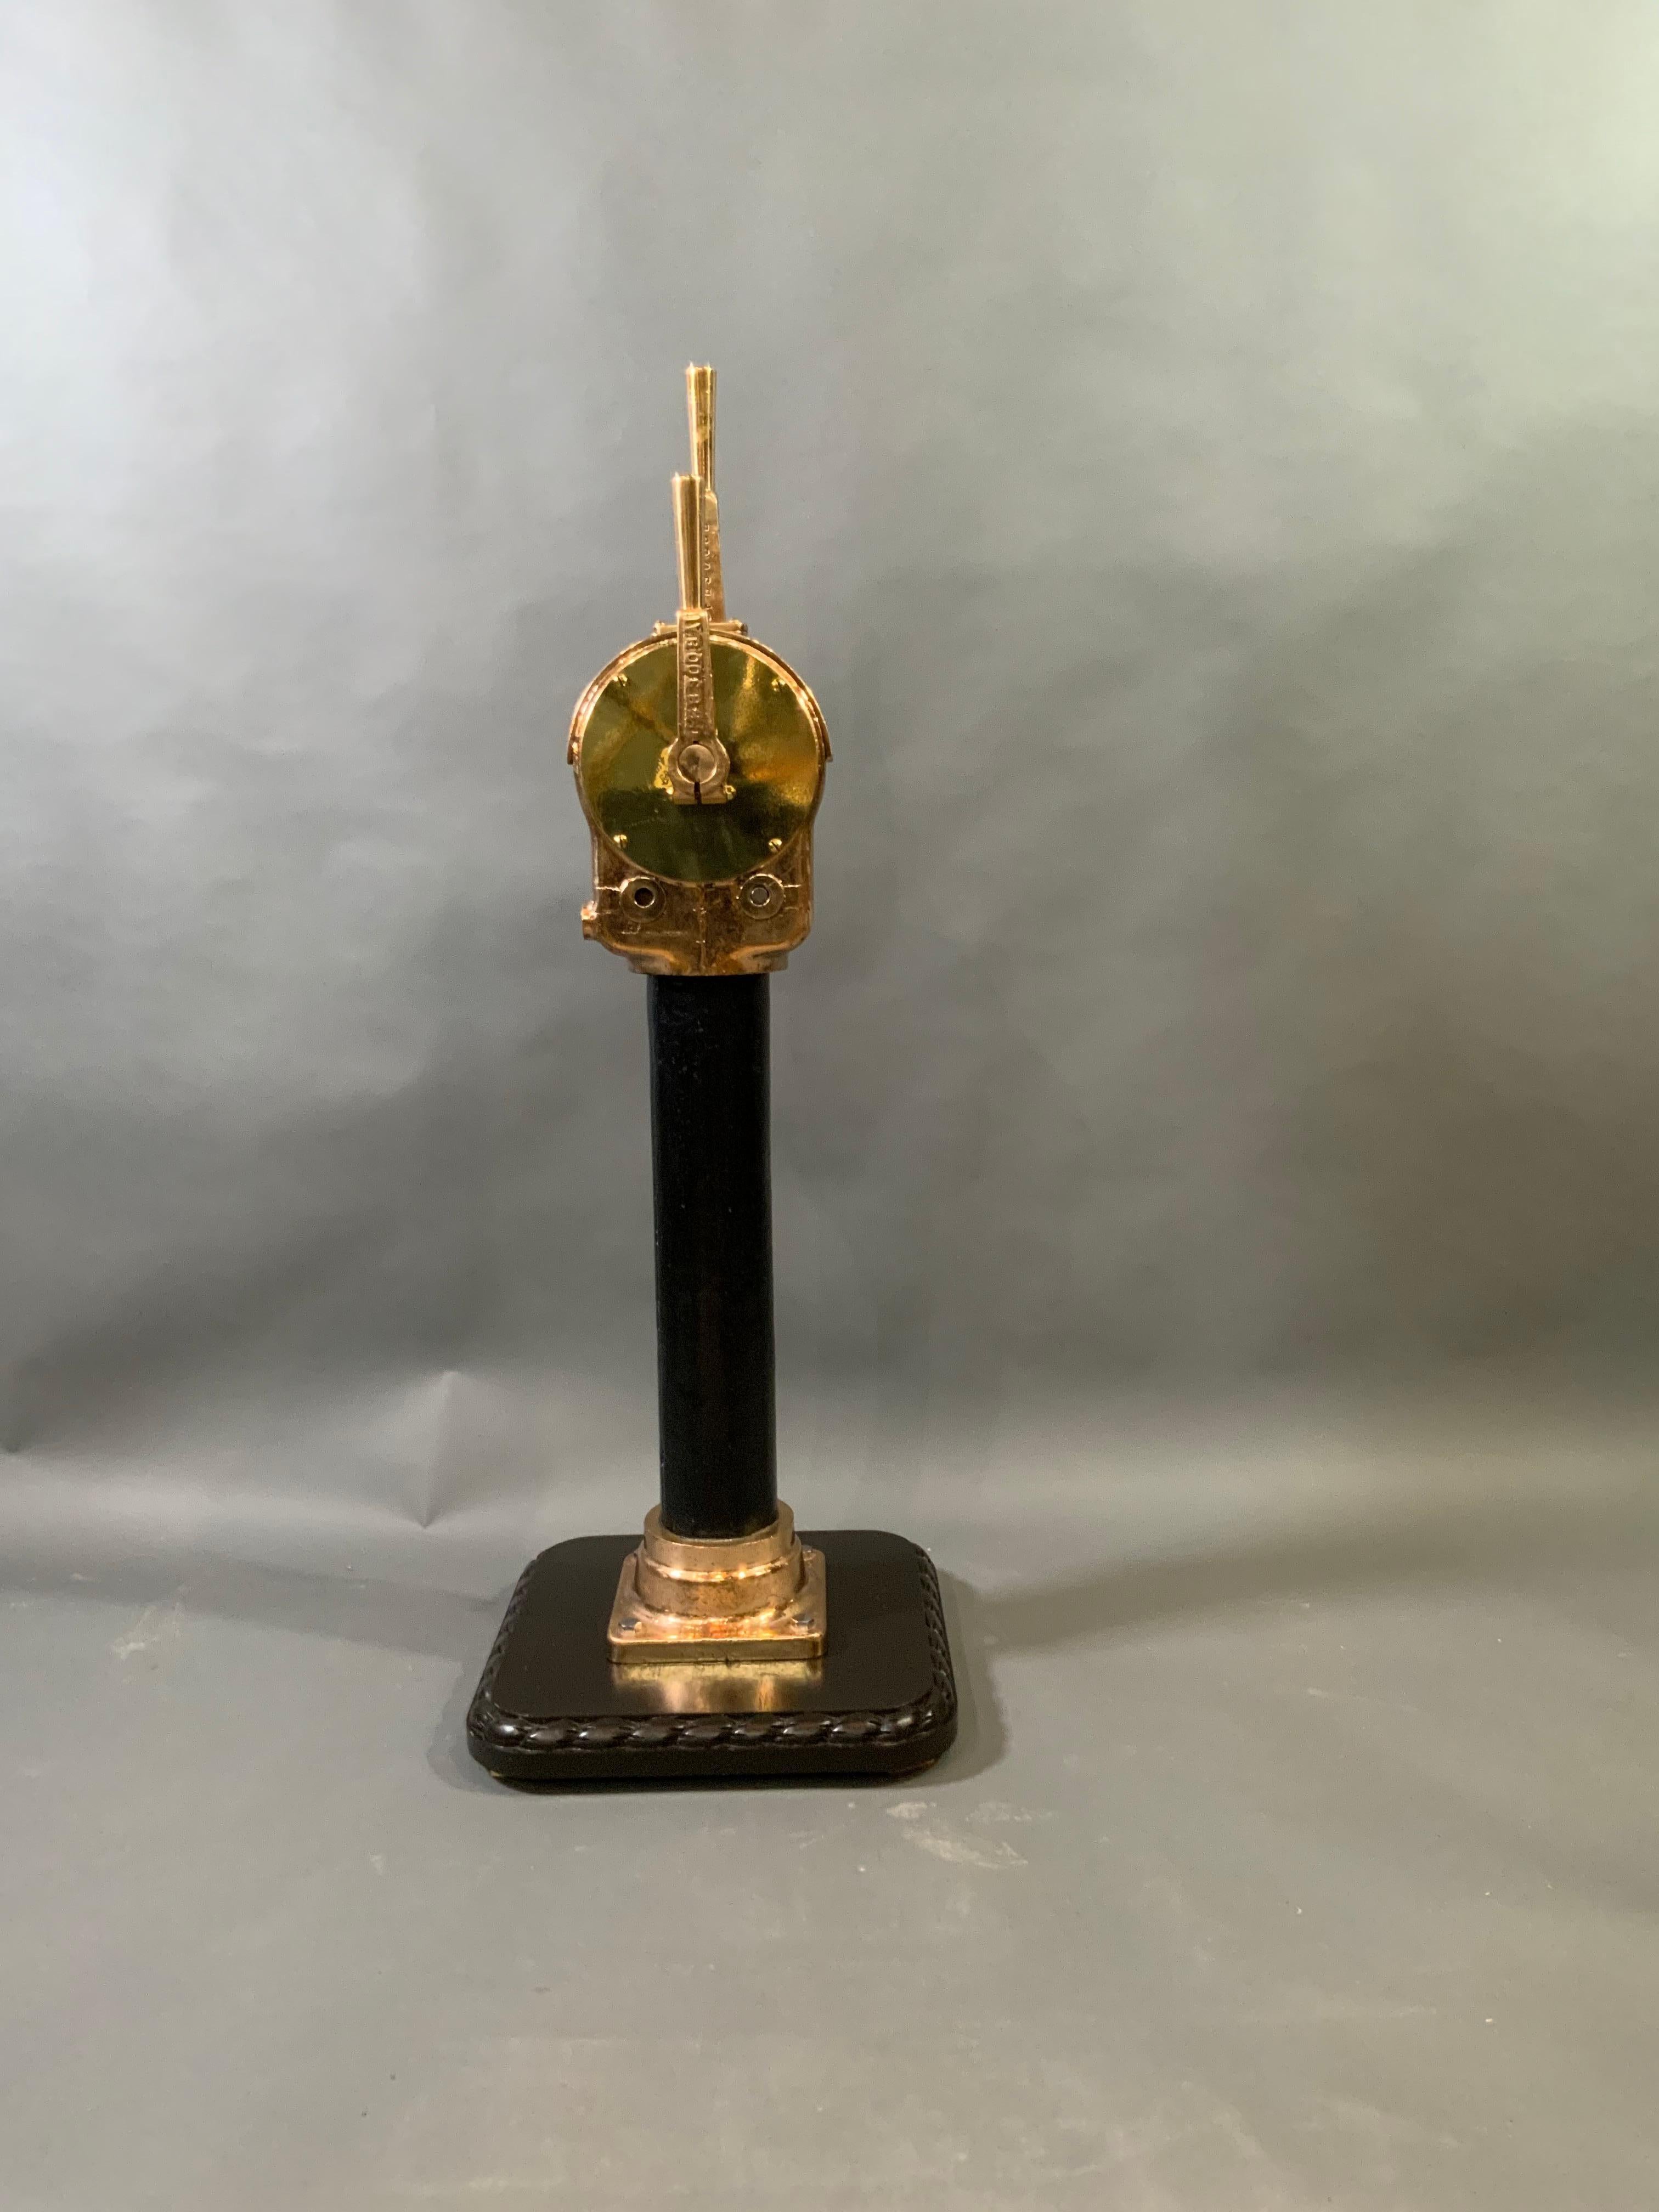 Solid brass ships throttle on stand. Highly polished and lacquered. Twin handle design. Weighs 92 pounds. Height is 39 by 8 by 9. Mounted to a 17 inch square base. Price $2895.